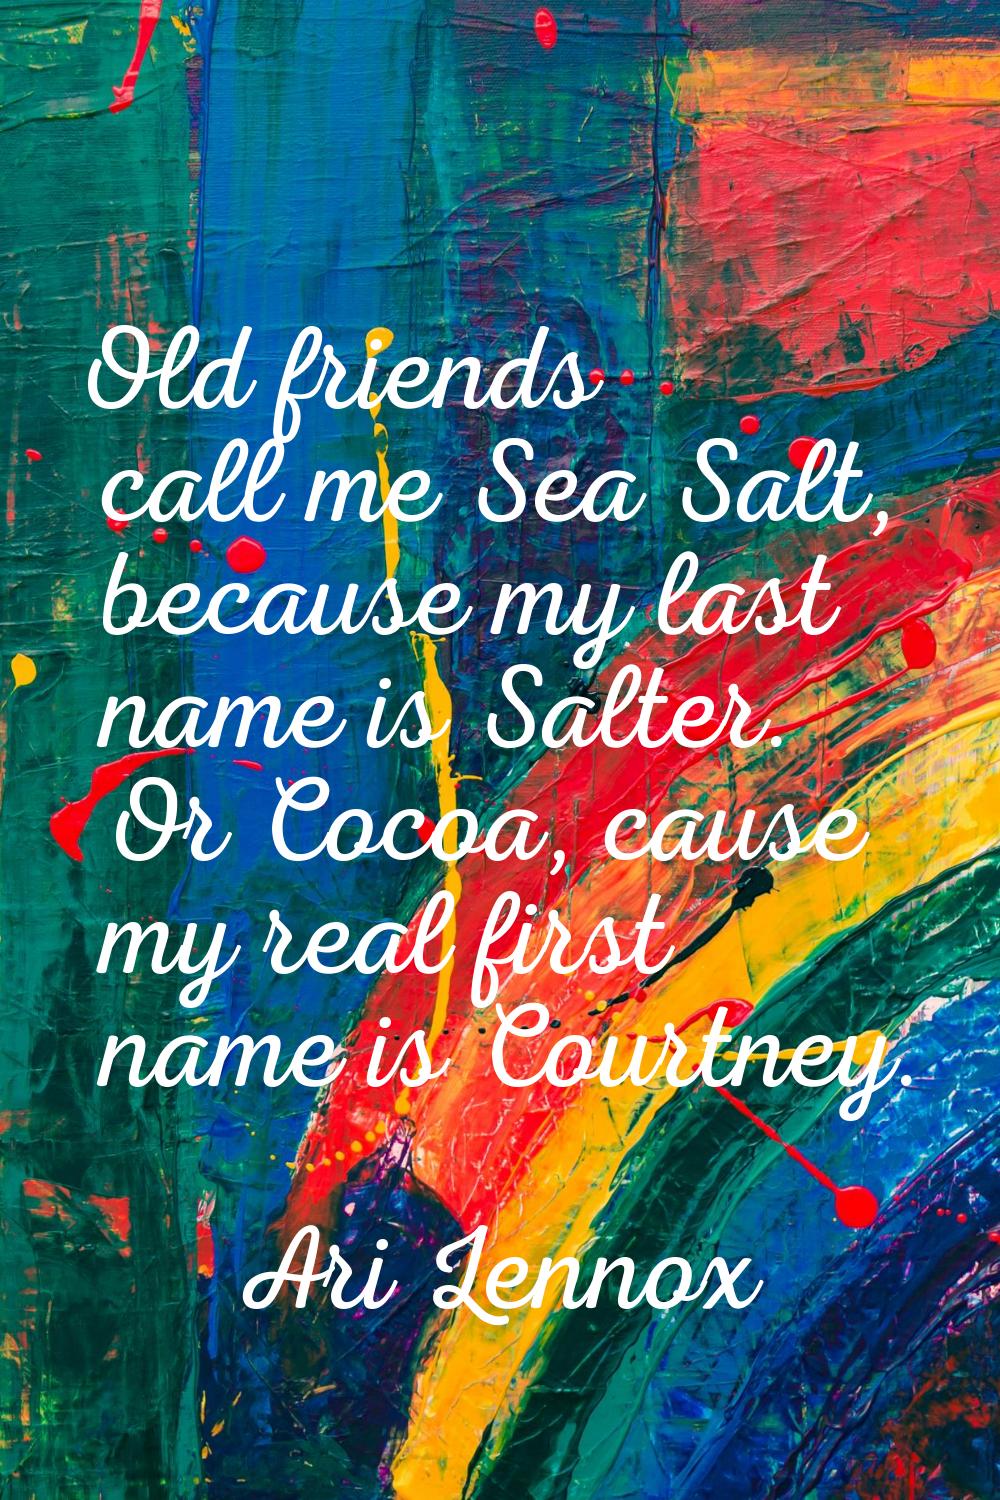 Old friends call me Sea Salt, because my last name is Salter. Or Cocoa, cause my real first name is